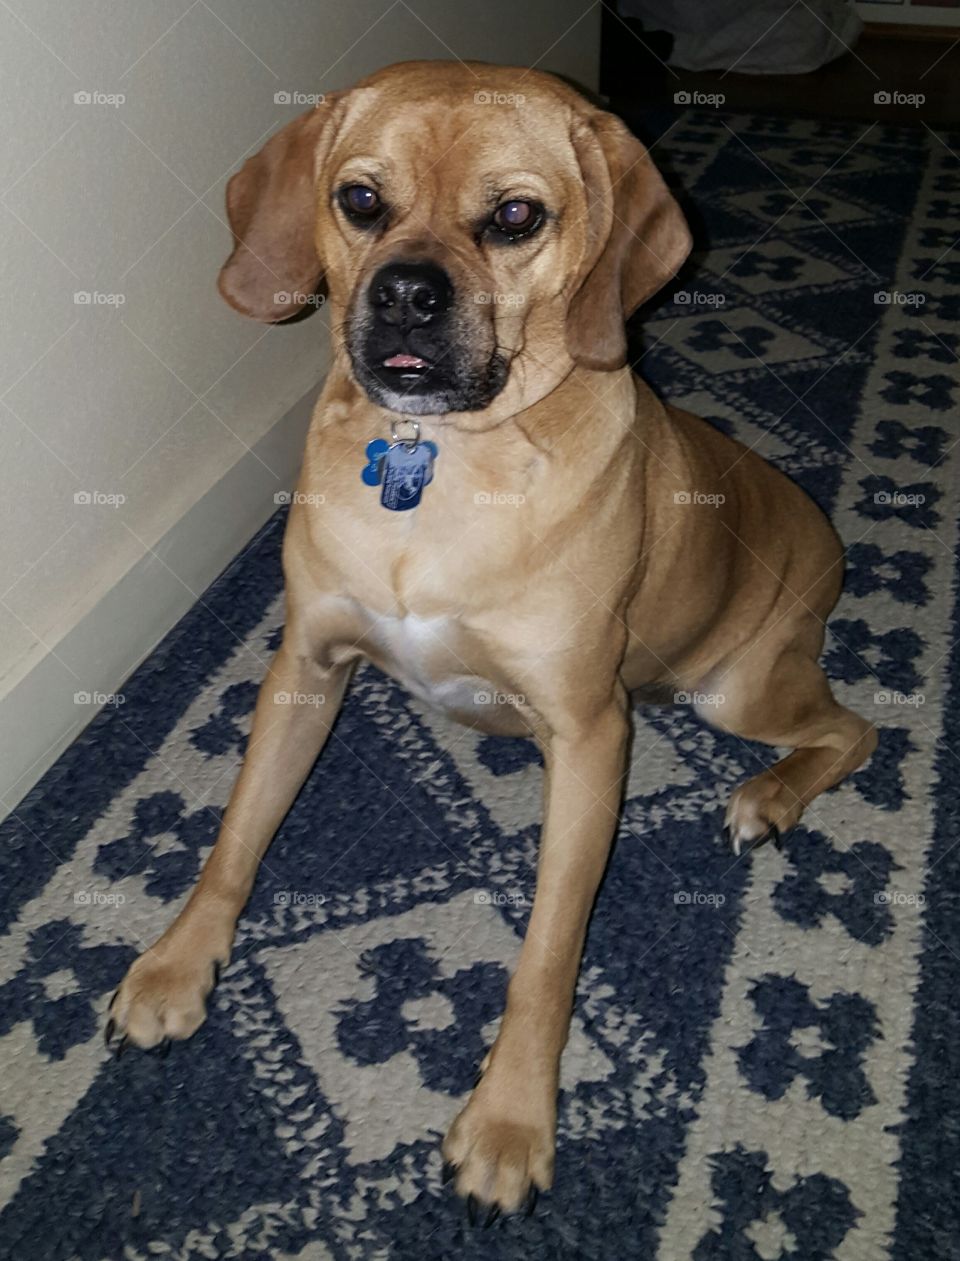 Chewy the Puggle